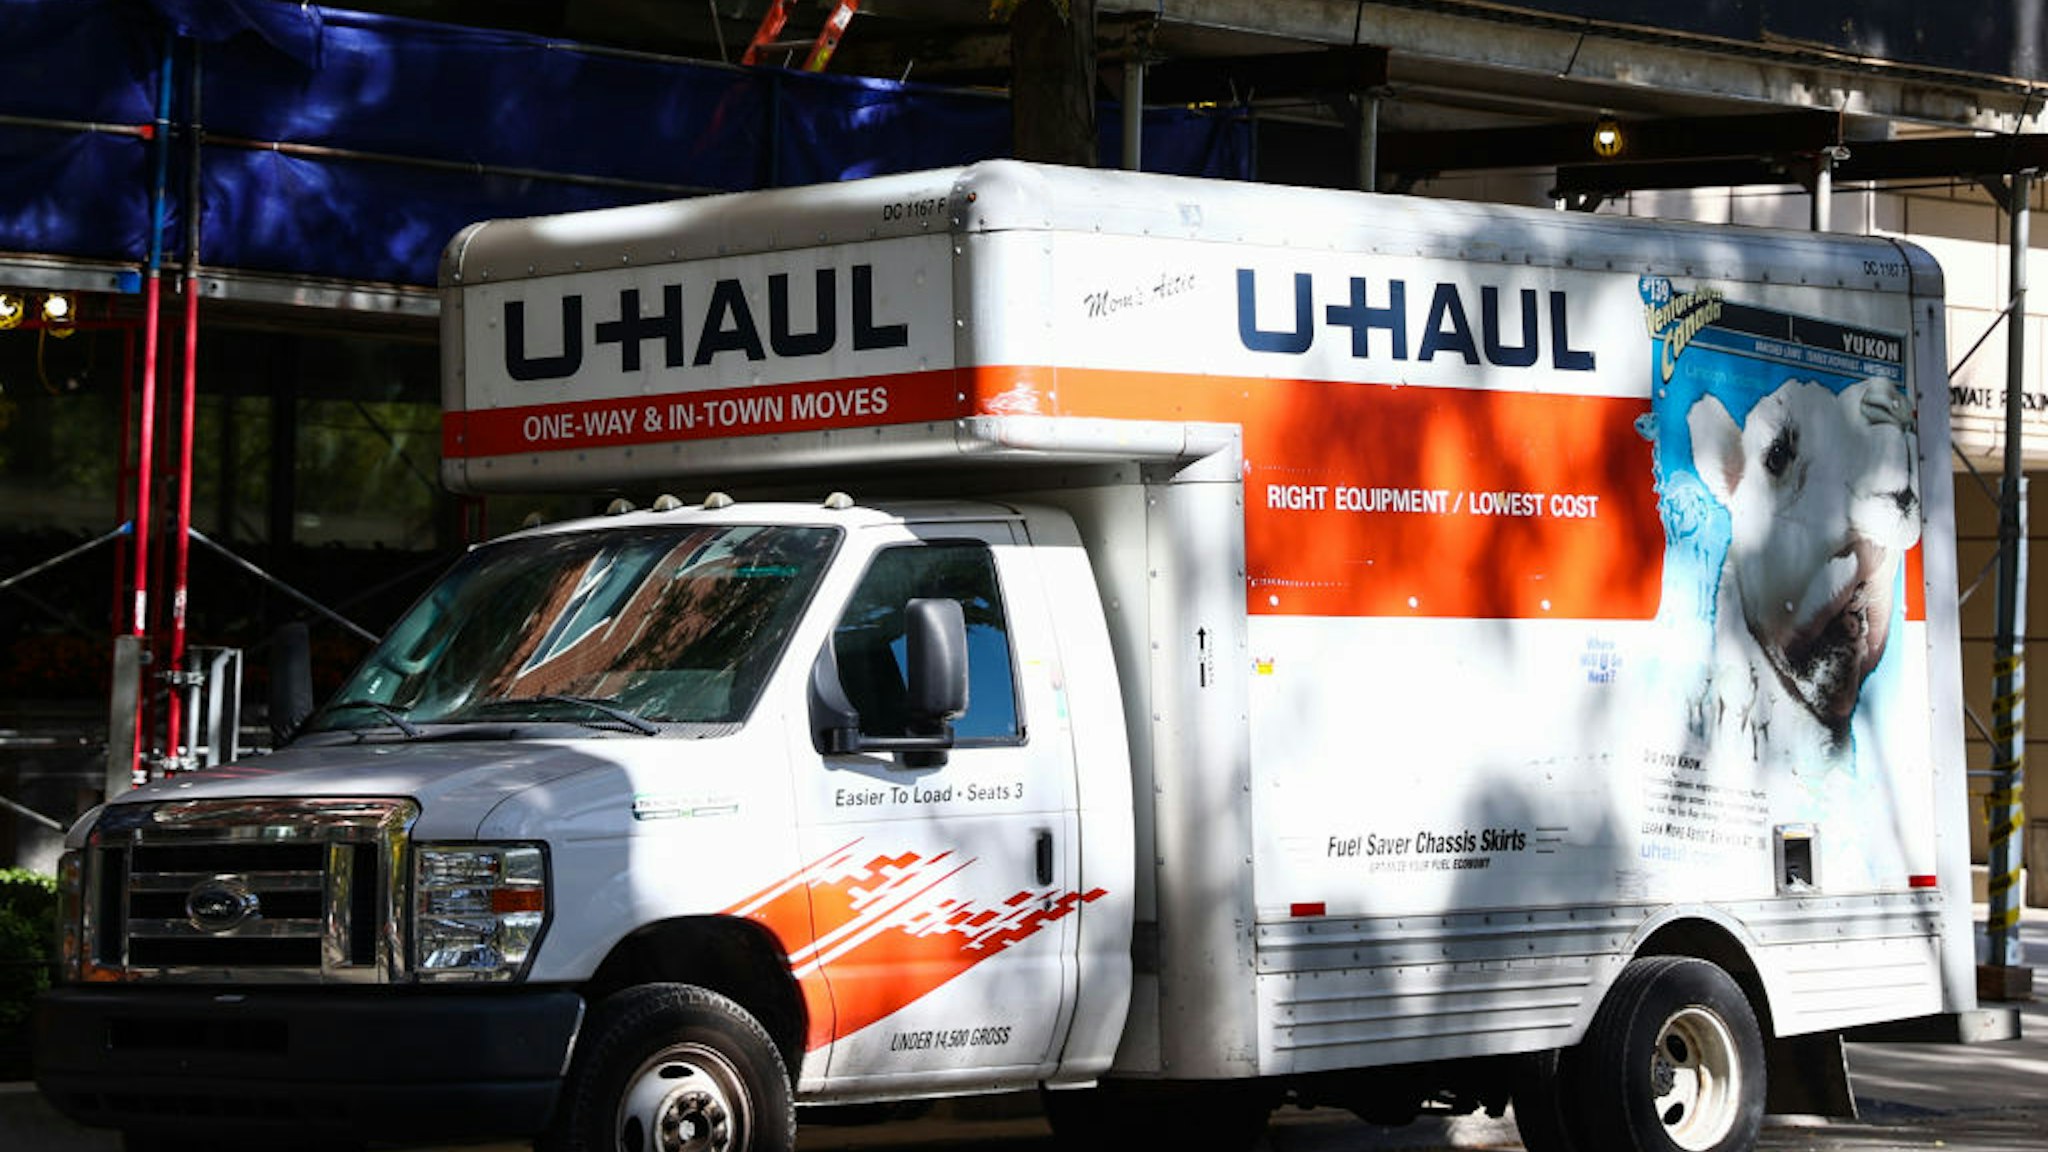 U-Haul logo is seen on the truck in Chicago, United States on October 19, 2022.